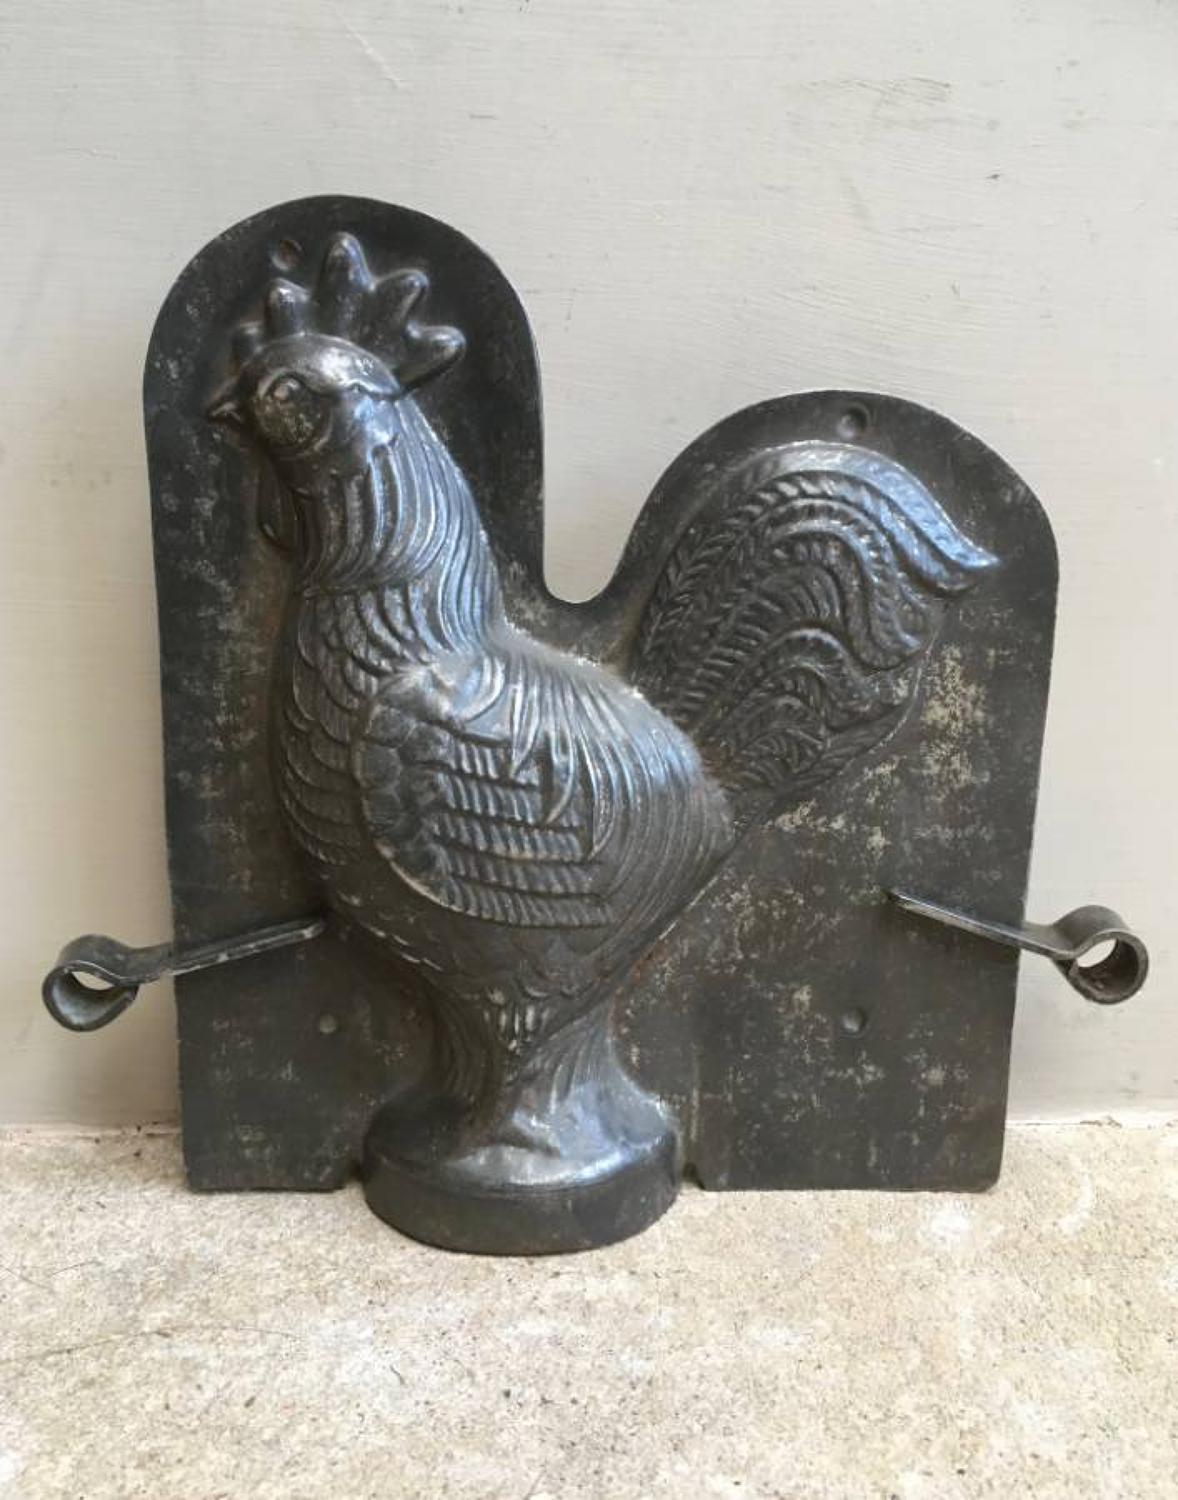 Superb 1920s Large Chicken Chocolate Mould - Complete with Both Sides